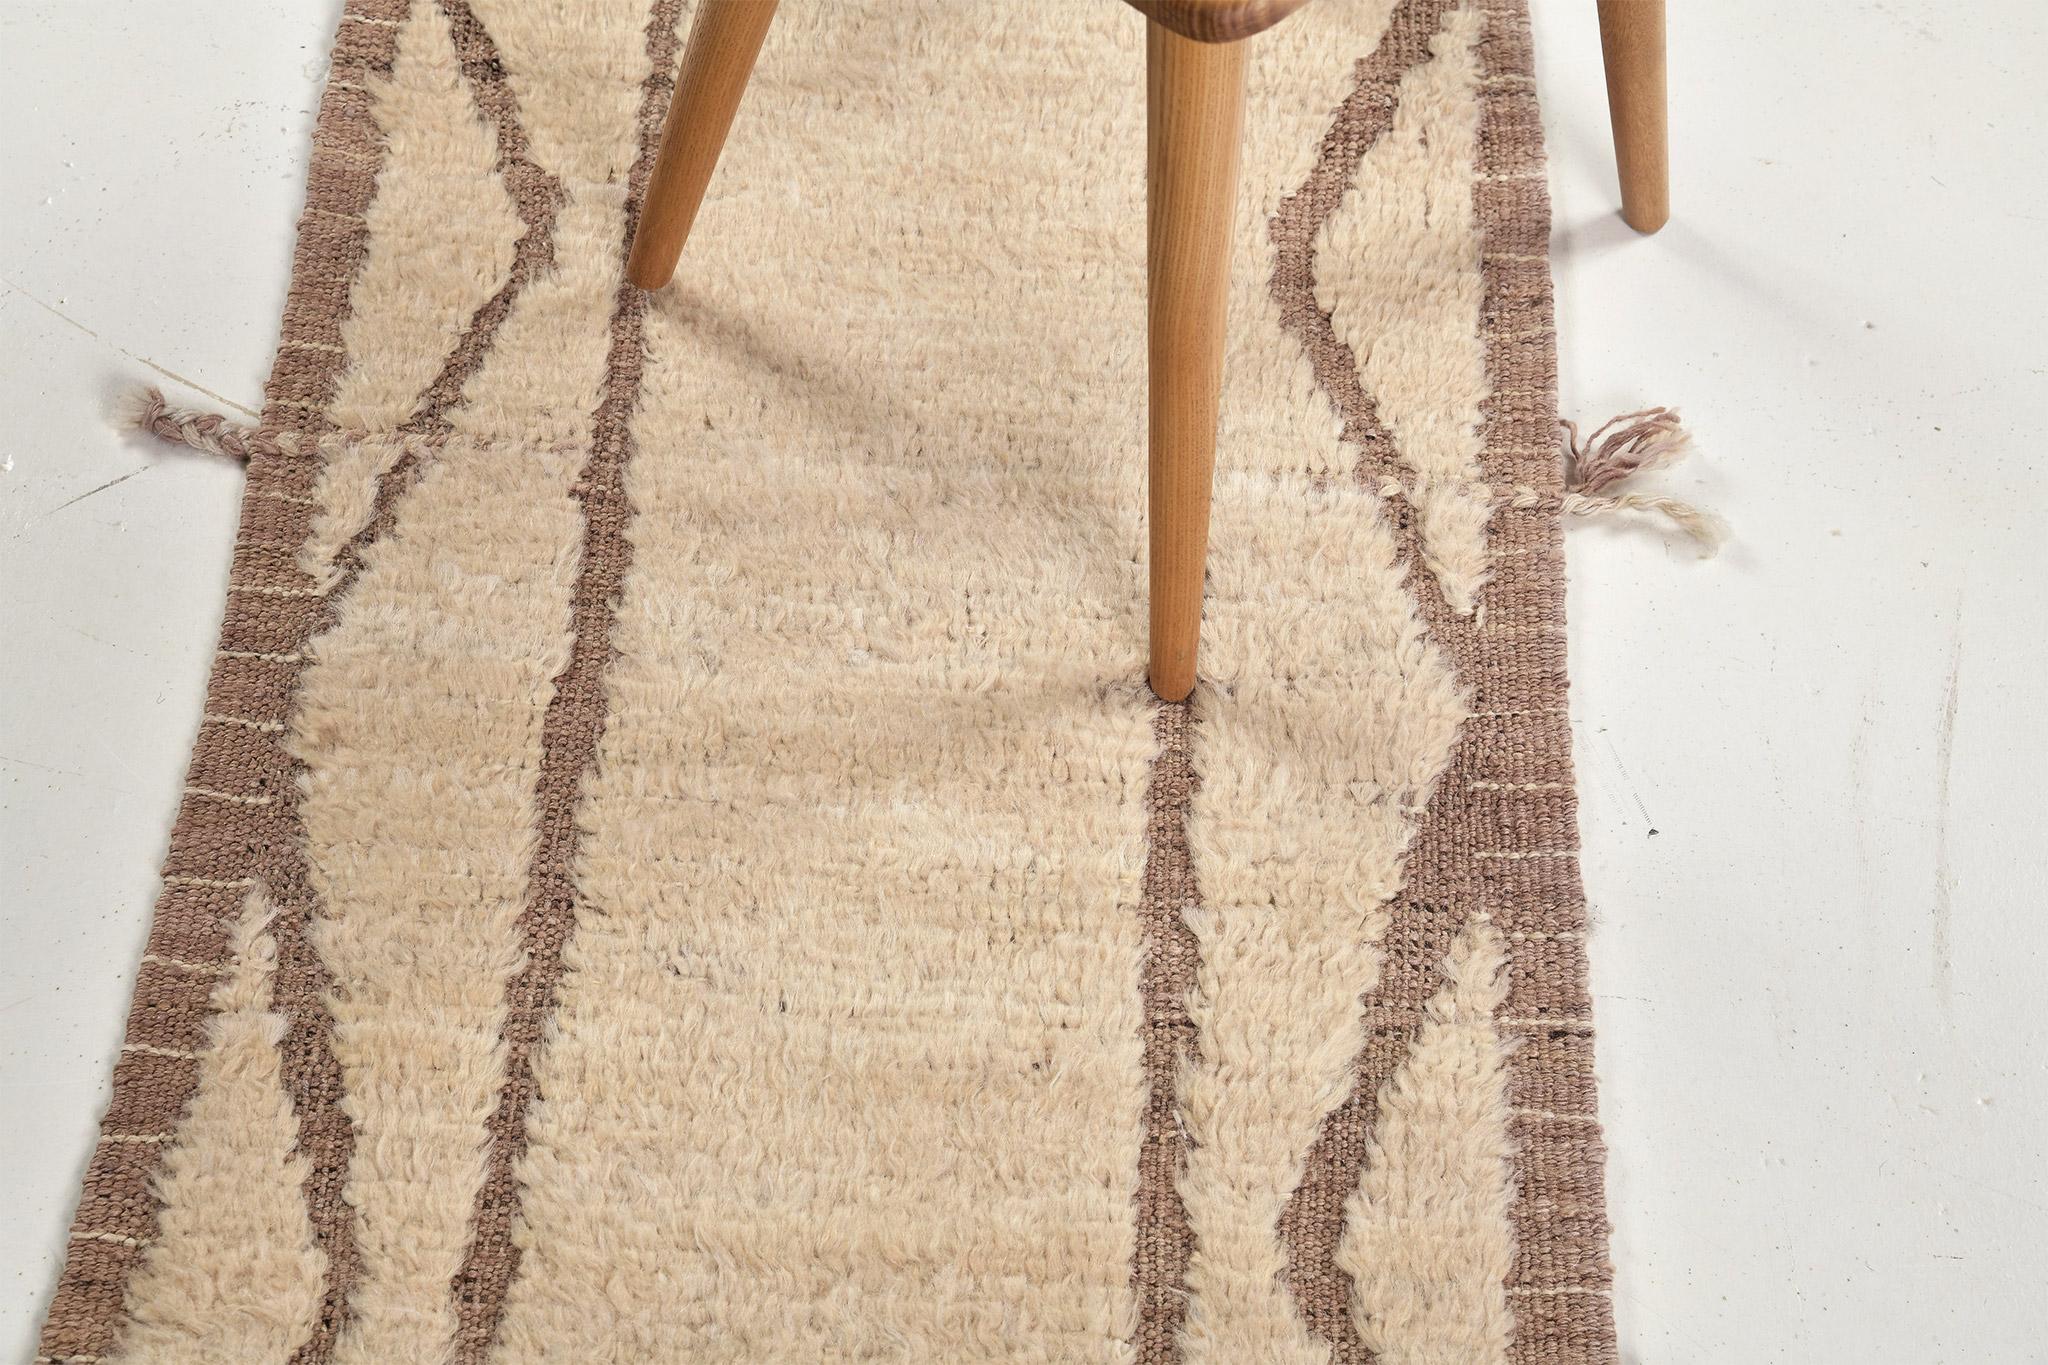 Cierzo is a signature collection of California. Handwoven luxurious wool rug, made of timeless design elements and neutral tones. Haute Bohemian collection: designed in Los Angeles named for the winds knitting together seasons, trees, dwellers of